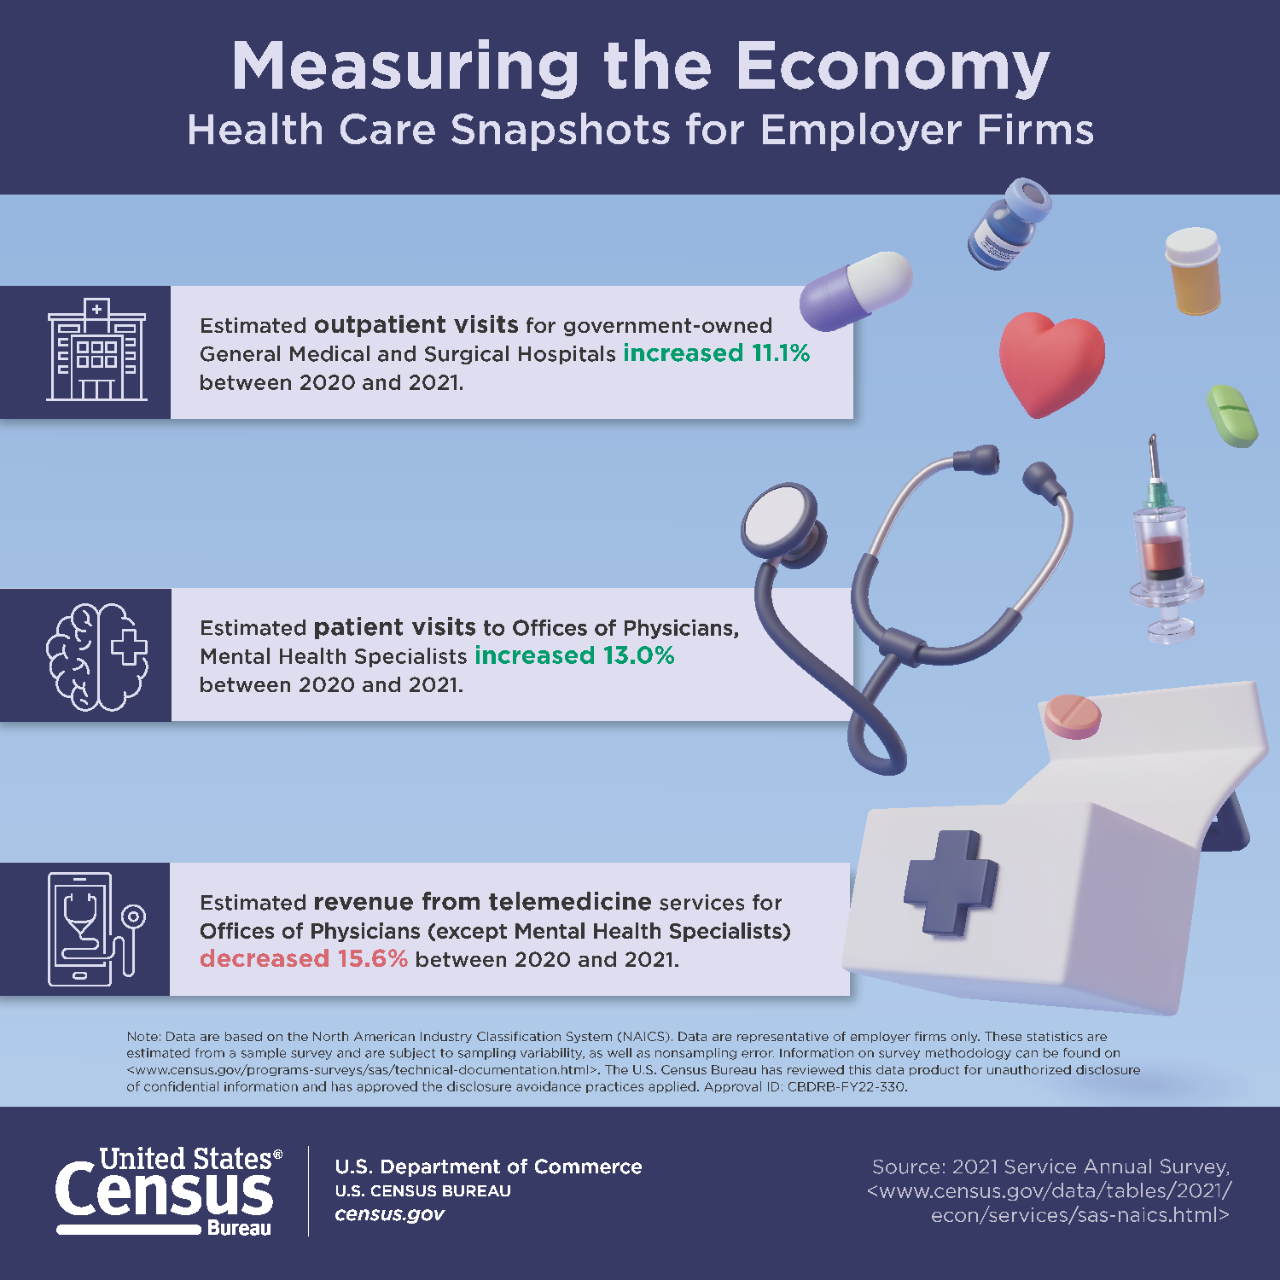 Measuring the Economy: Health Care Snapshots for Employer Firms